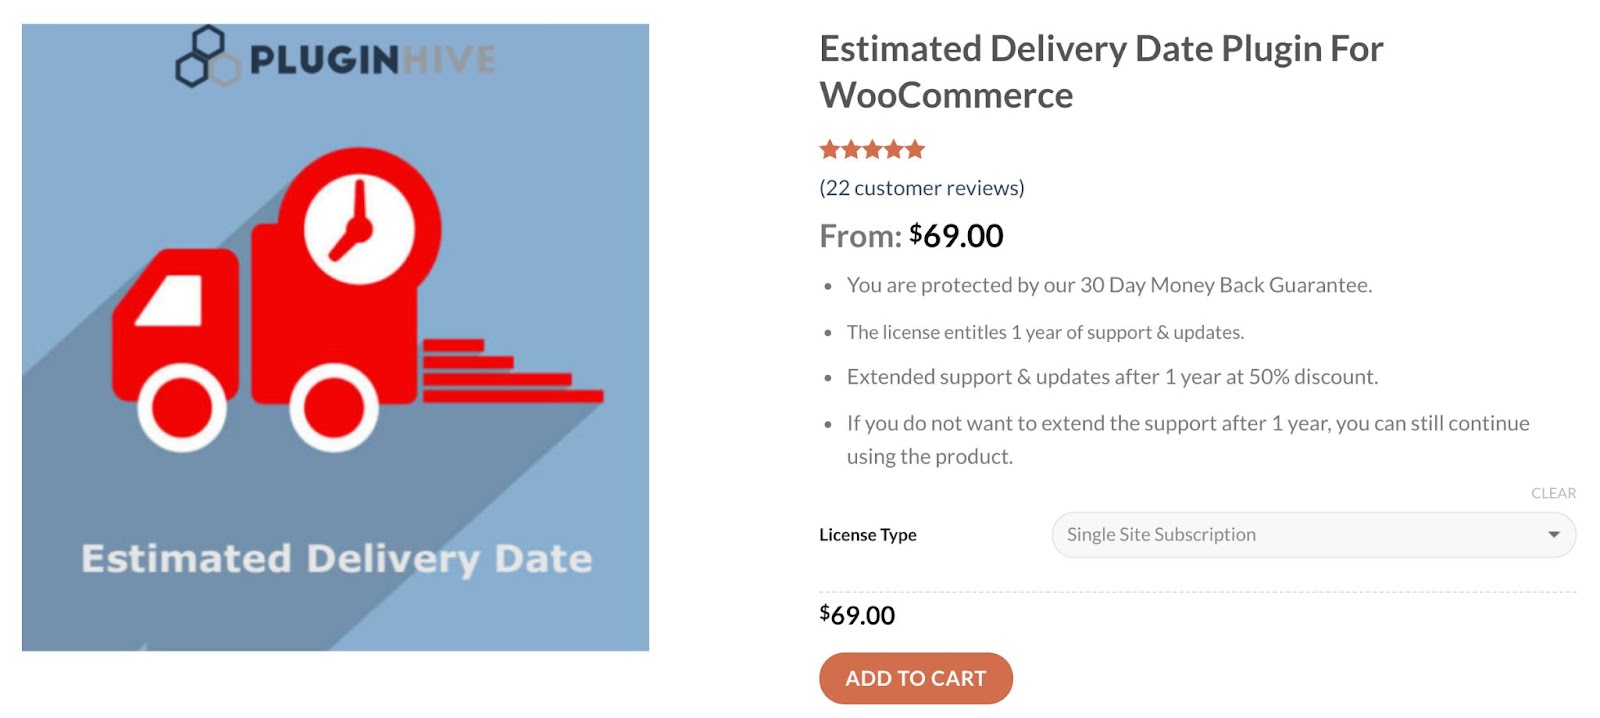 Estimated Order Delivery Date Plugin for WooCommerce